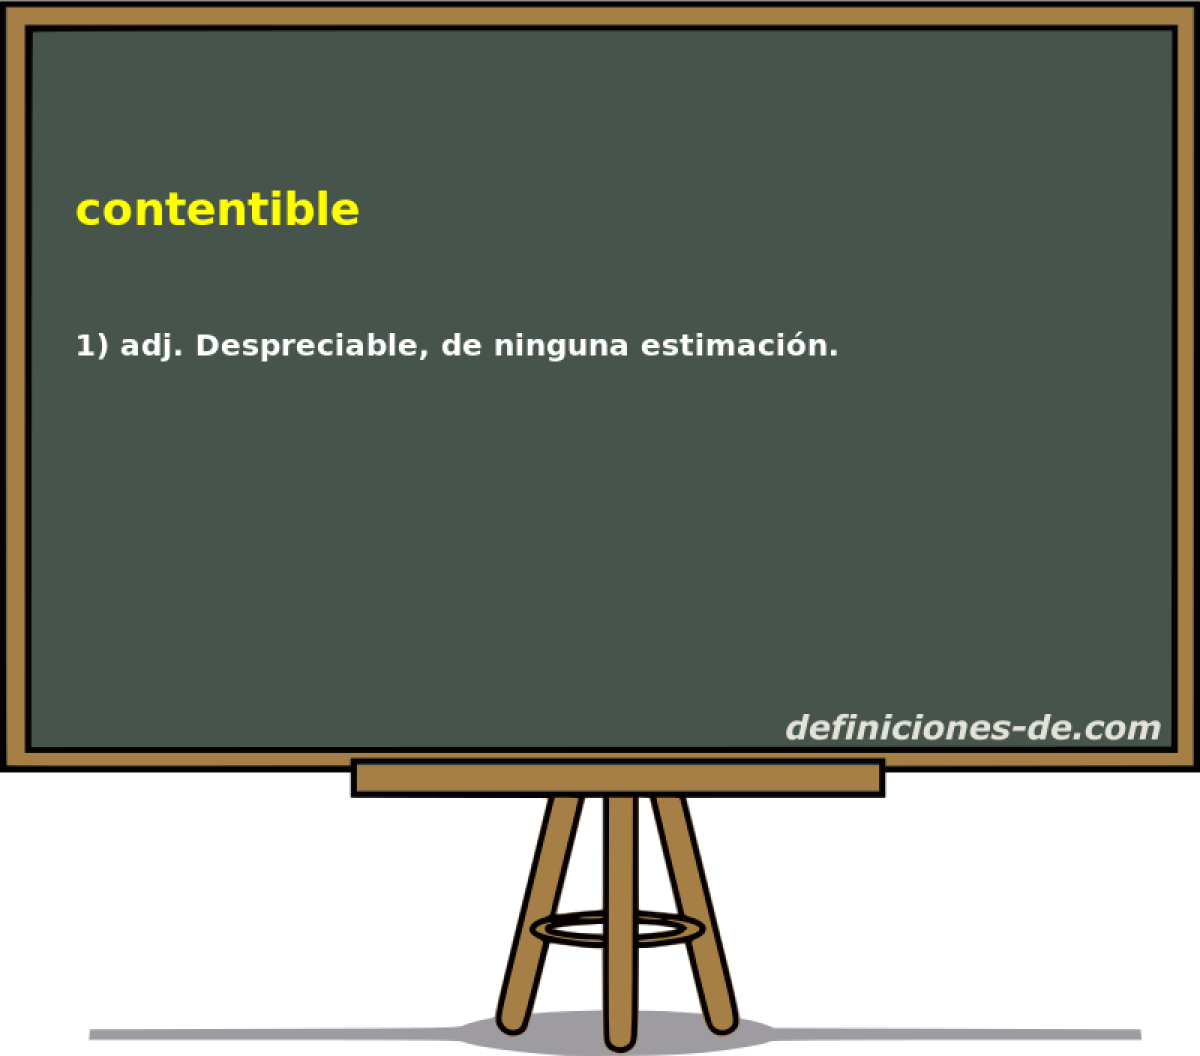 contentible 